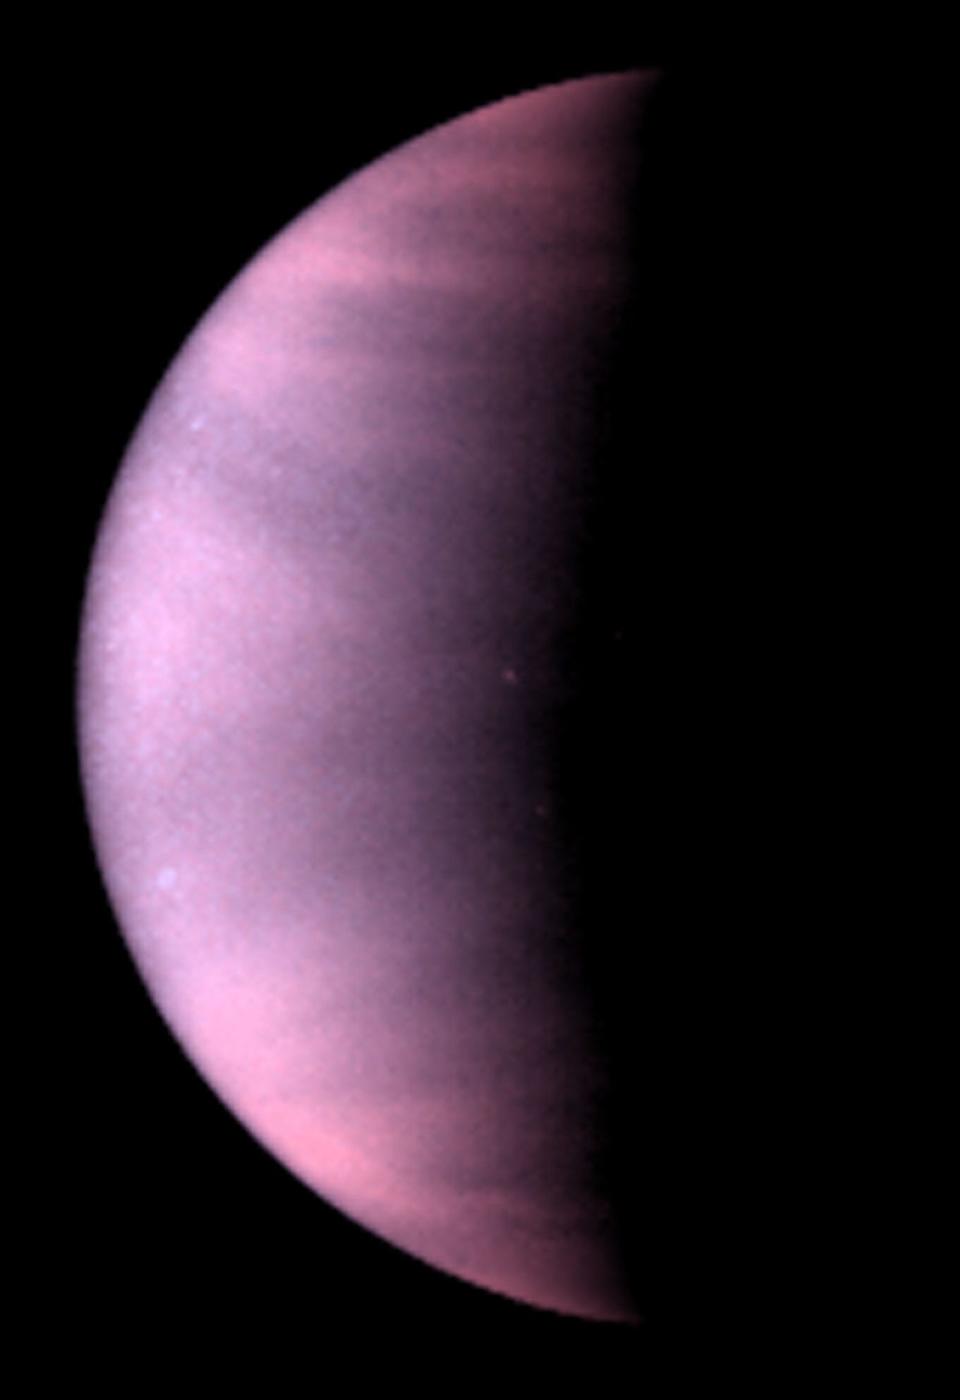 This is a NASA/ESA Hubble Space Telescope ultraviolet-light image of the planet Venus, taken on Jan. 24 1995, when Venus was at a distance of 70.6 million miles from Earth. Venus is covered with clouds made of sulfuric acid, rather than the water-vapor clouds found on Earth. These clouds permanently shroud Venus’ volcanic surface, which has been radar mapped by spacecraft and from Earth-based telescope.